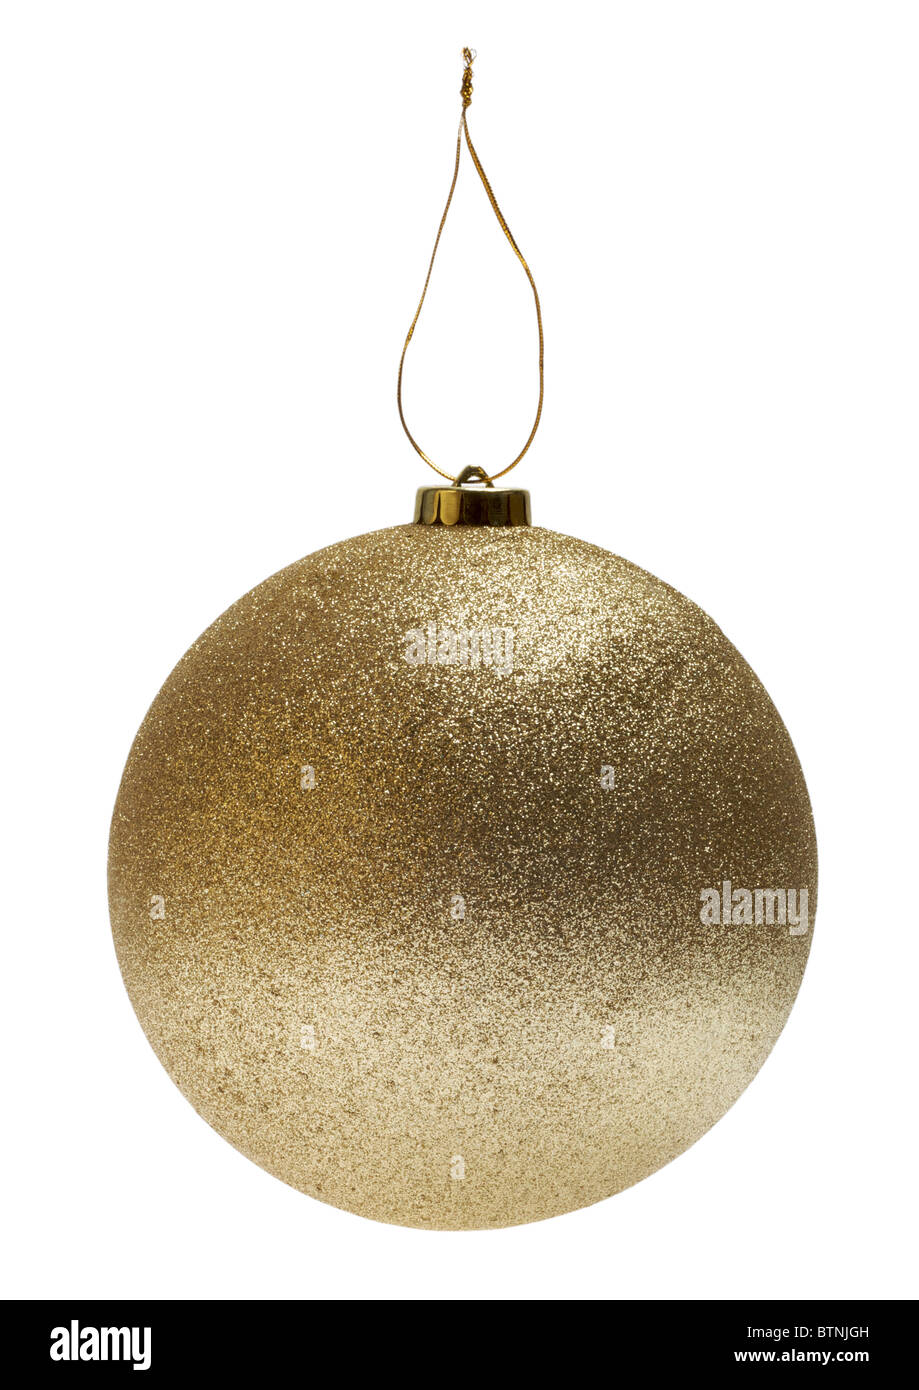 Gold christmas bauble on white background Stock Photo